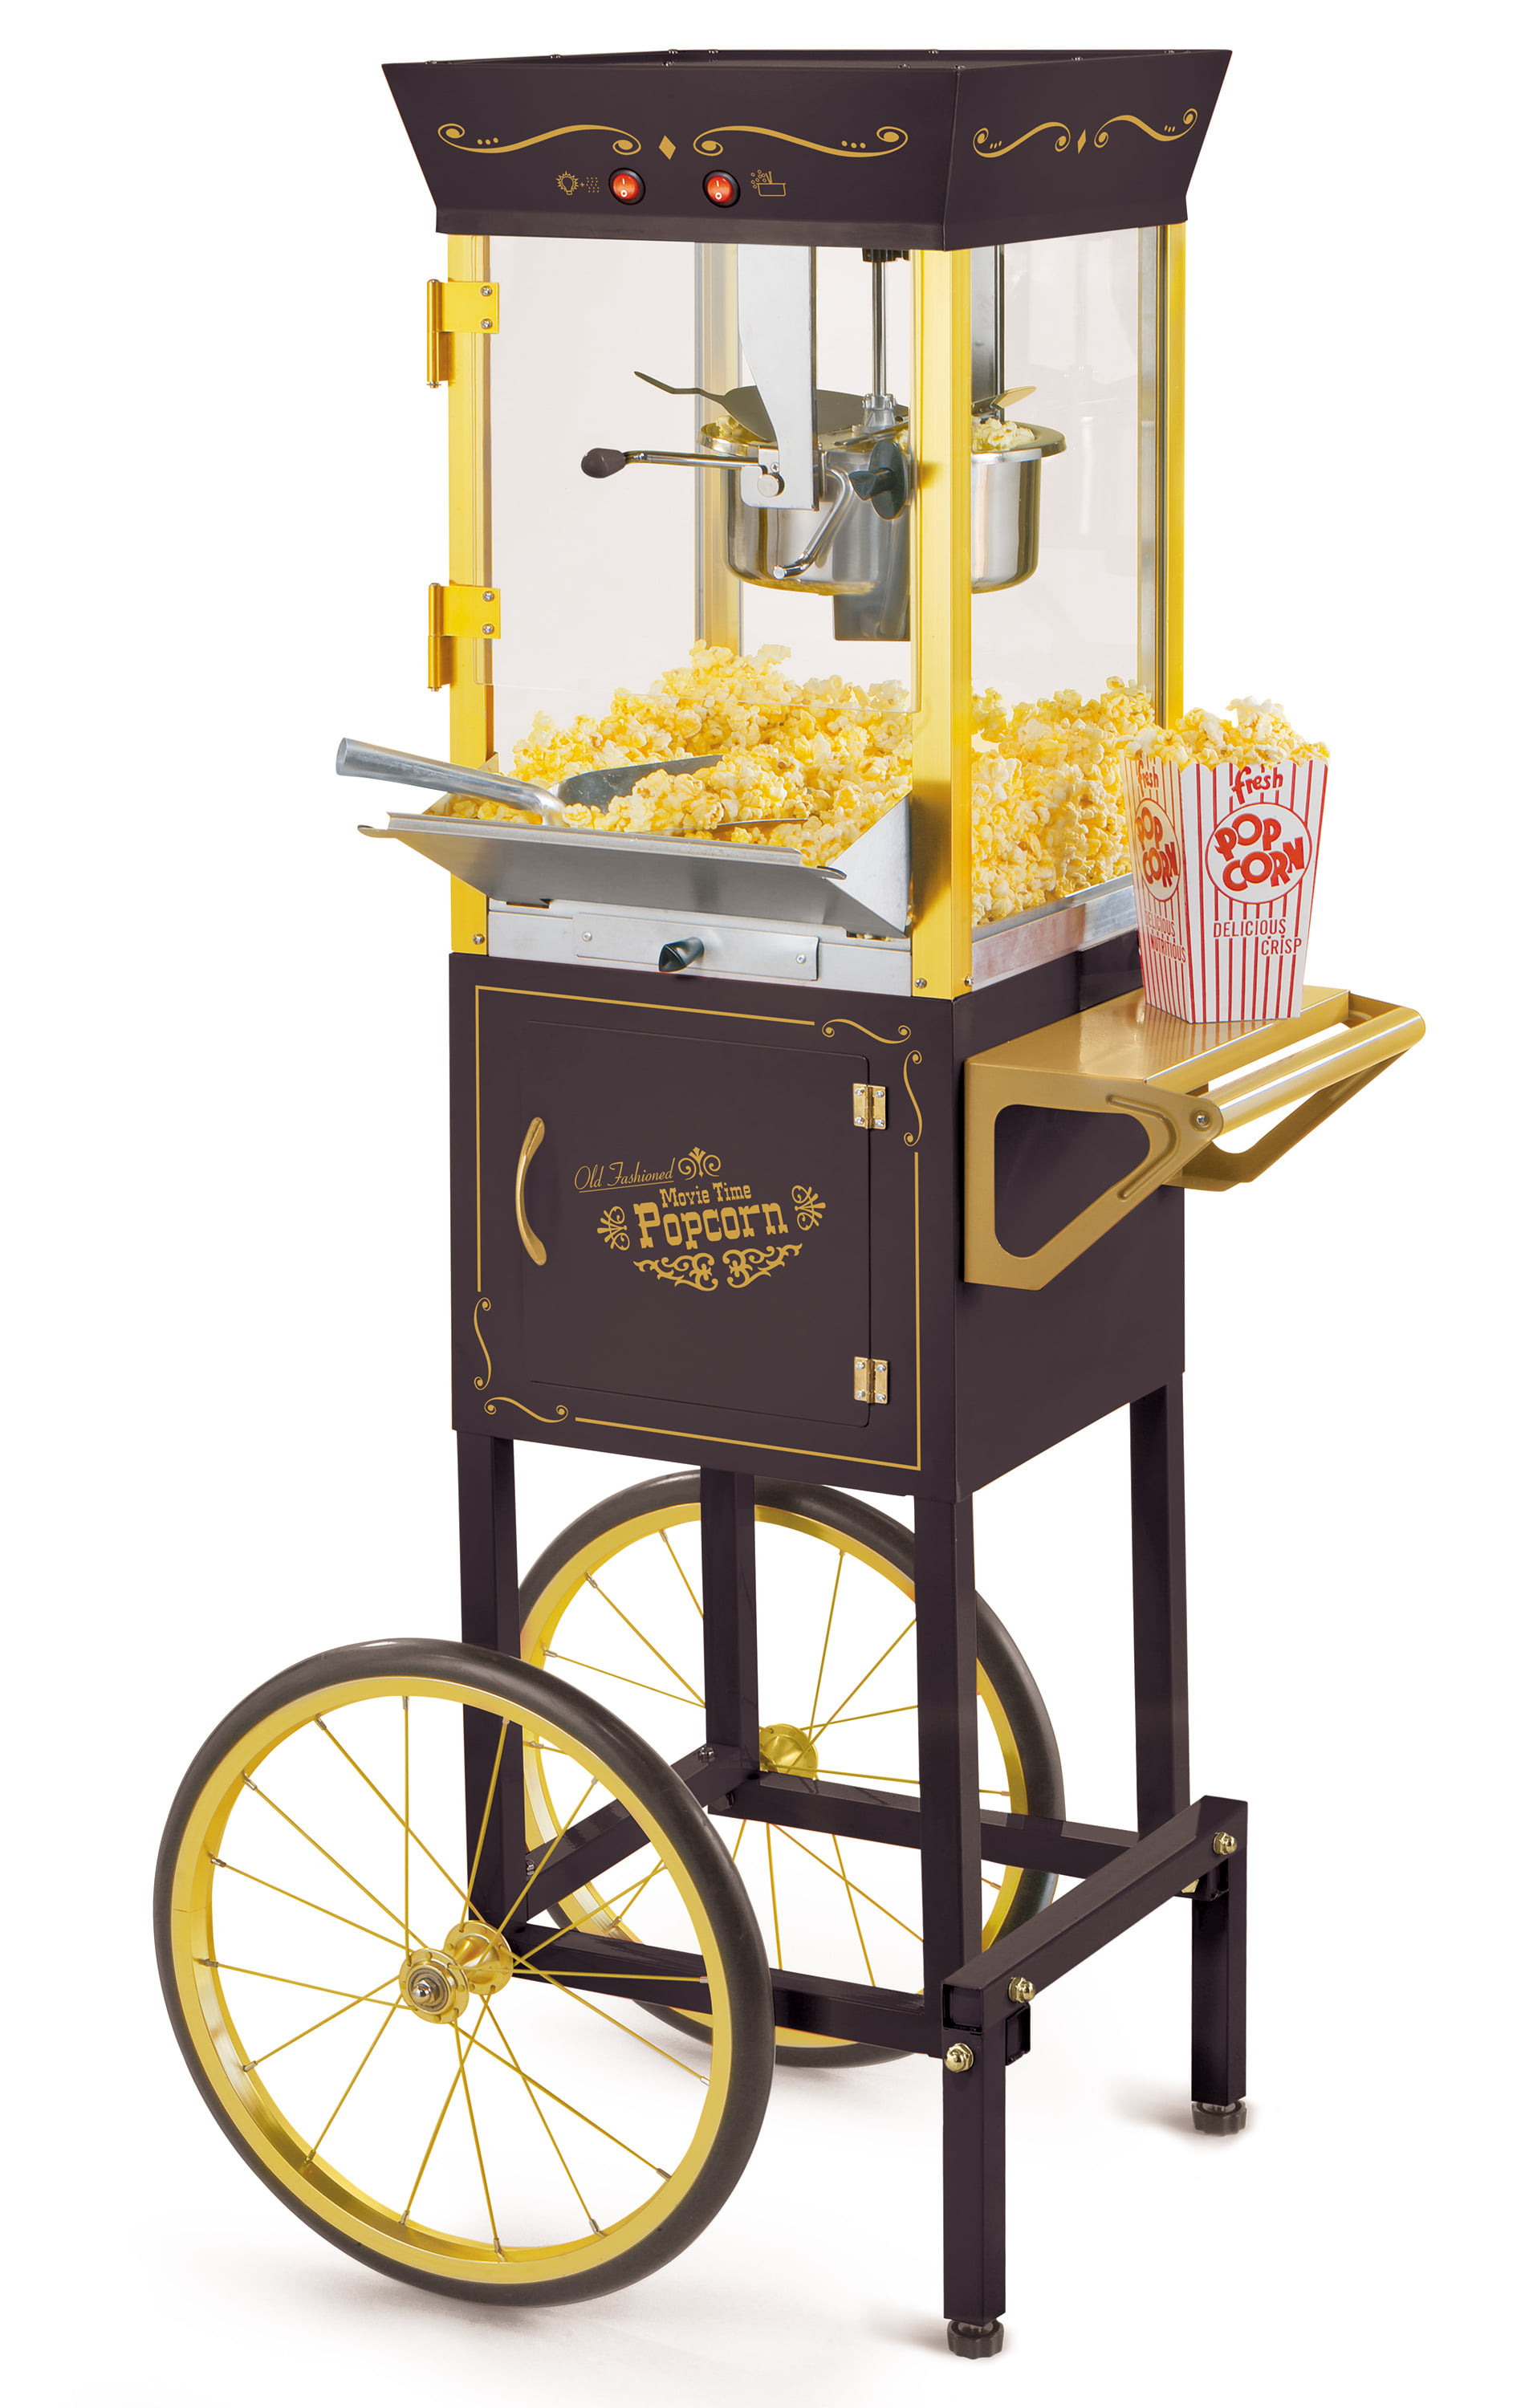 Ready To Use Made WJJ Stainless Steel Commercial Popcorn Machine Durable Antique Countertop Style Suitable For Retail